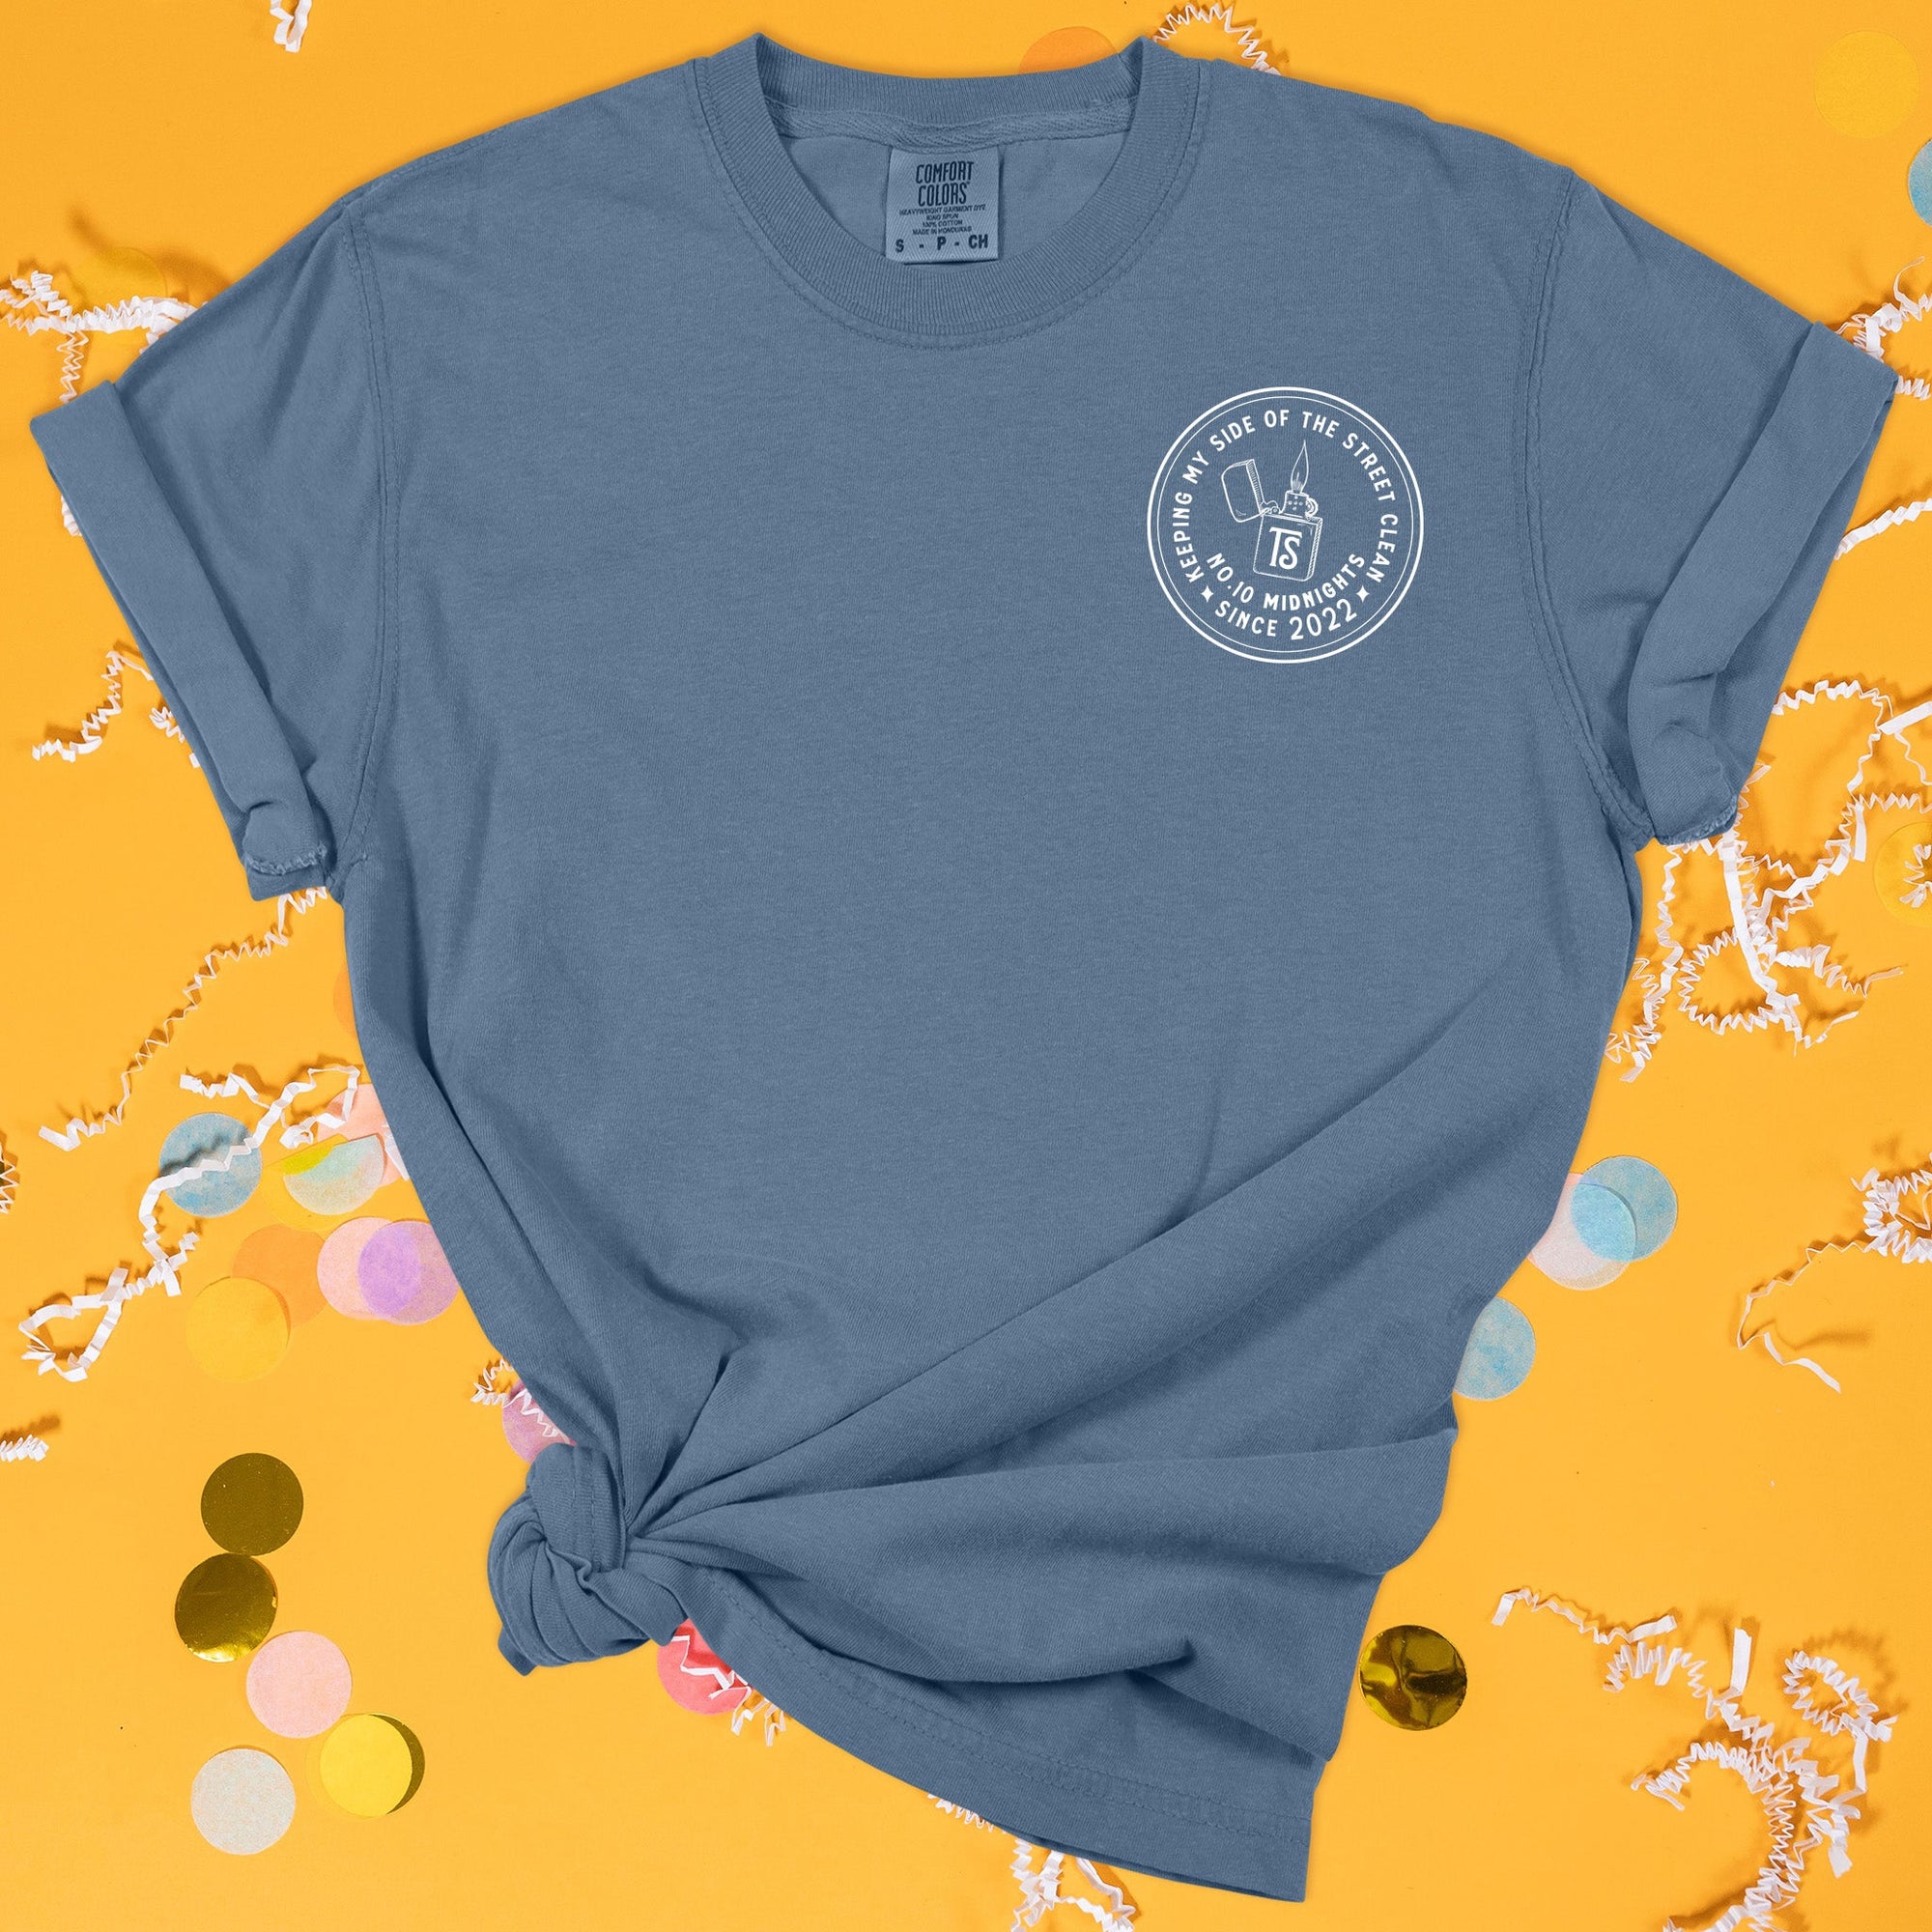 On a sunny mustard background sits the front of a t-shirt with white crinkle and big, colorful confetti scattered around. This Taylor Swift Inspired Reputation tee is dark blue with white lettering and a lighter over the left chest area. It says "KEEPING MY SIDE OF THE STREE CLEAN SINCE 2022" and "NO.10 MIDNIGHTS." The lighter has a "TS" on the front of it.